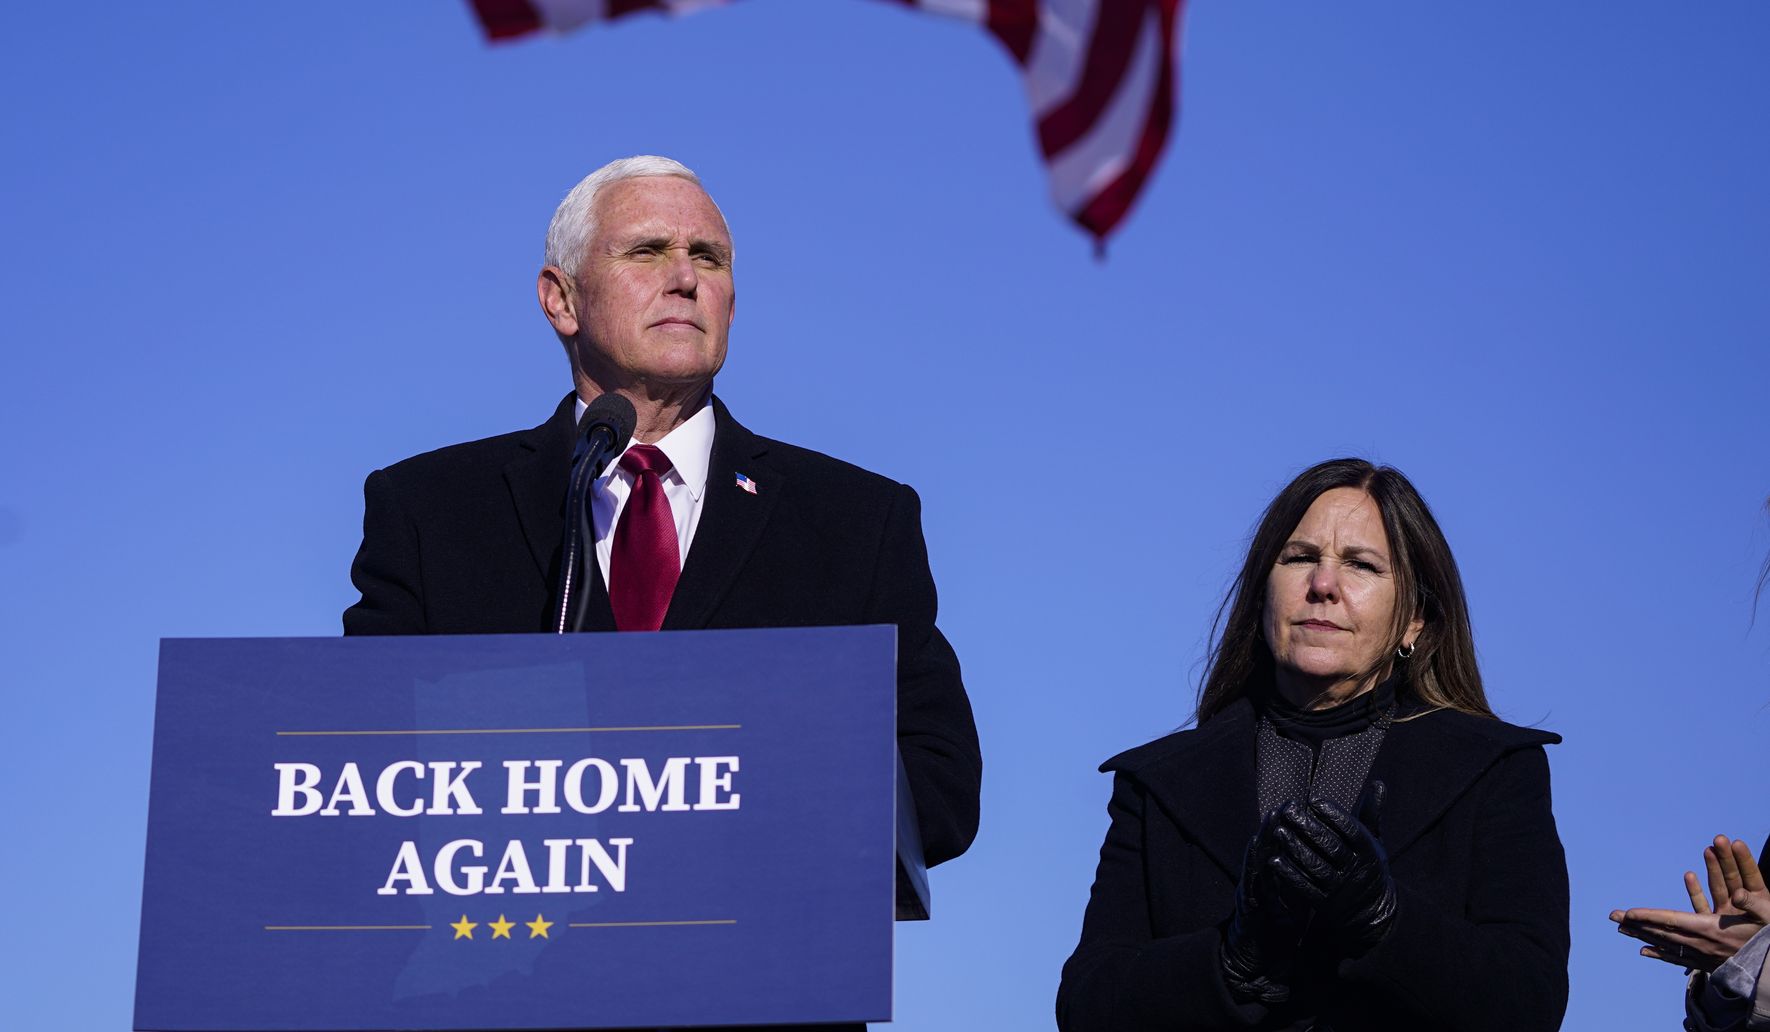 Mike Pence Launches Political Advocacy Group “Advancing American Freedom”